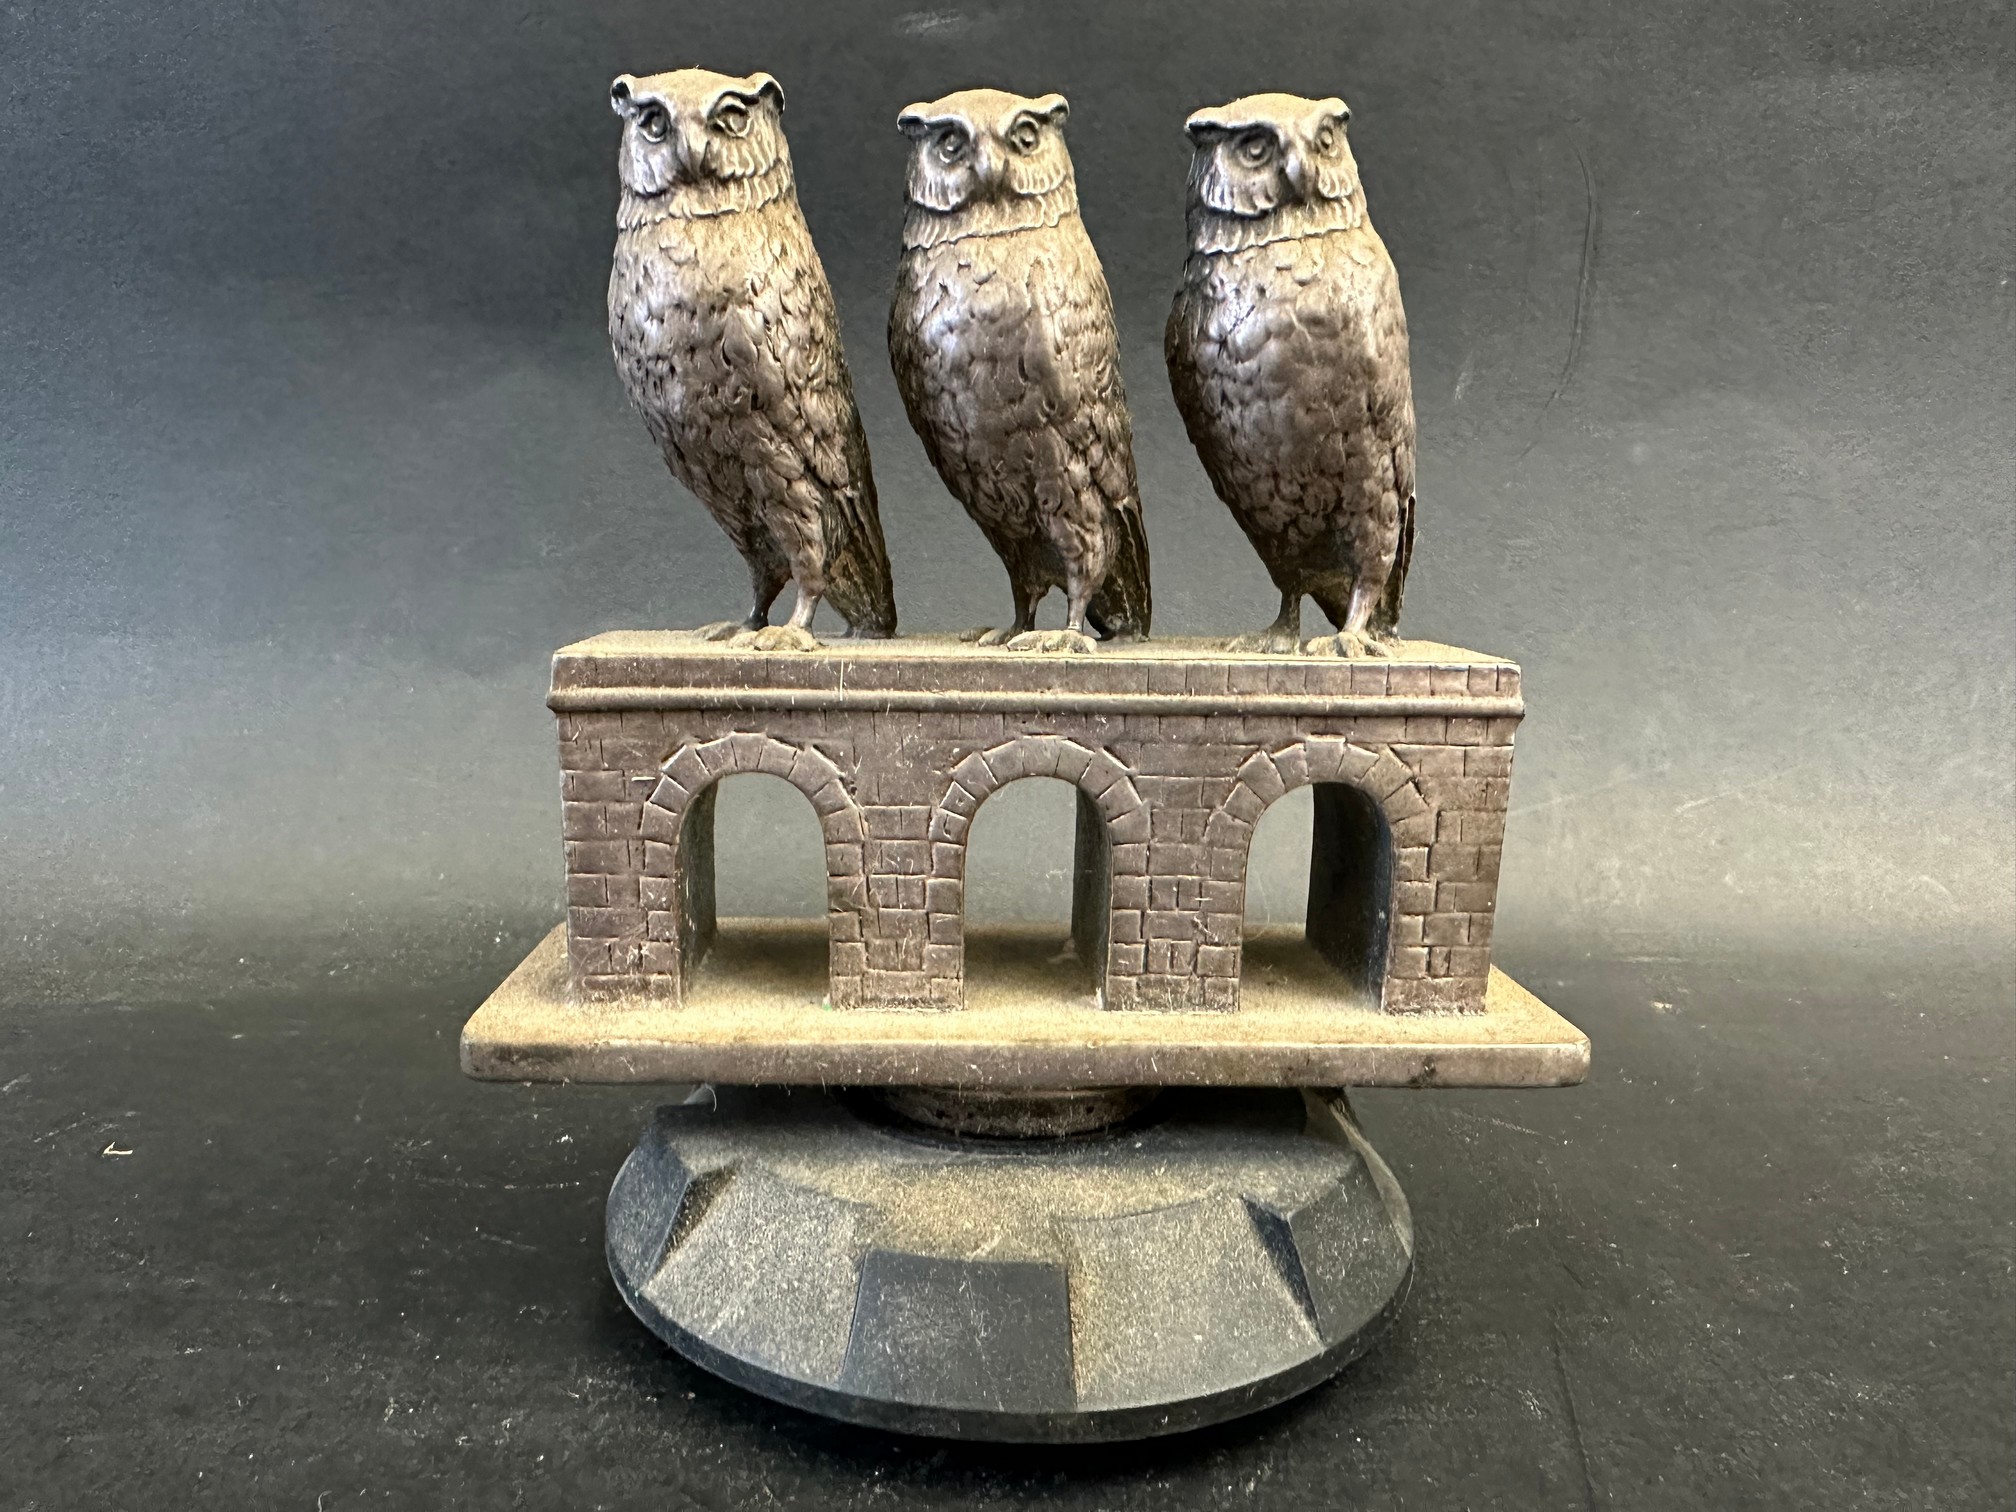 A rare and unusual car accessory mascot depicting three owls evenly placed upon a bridge of three